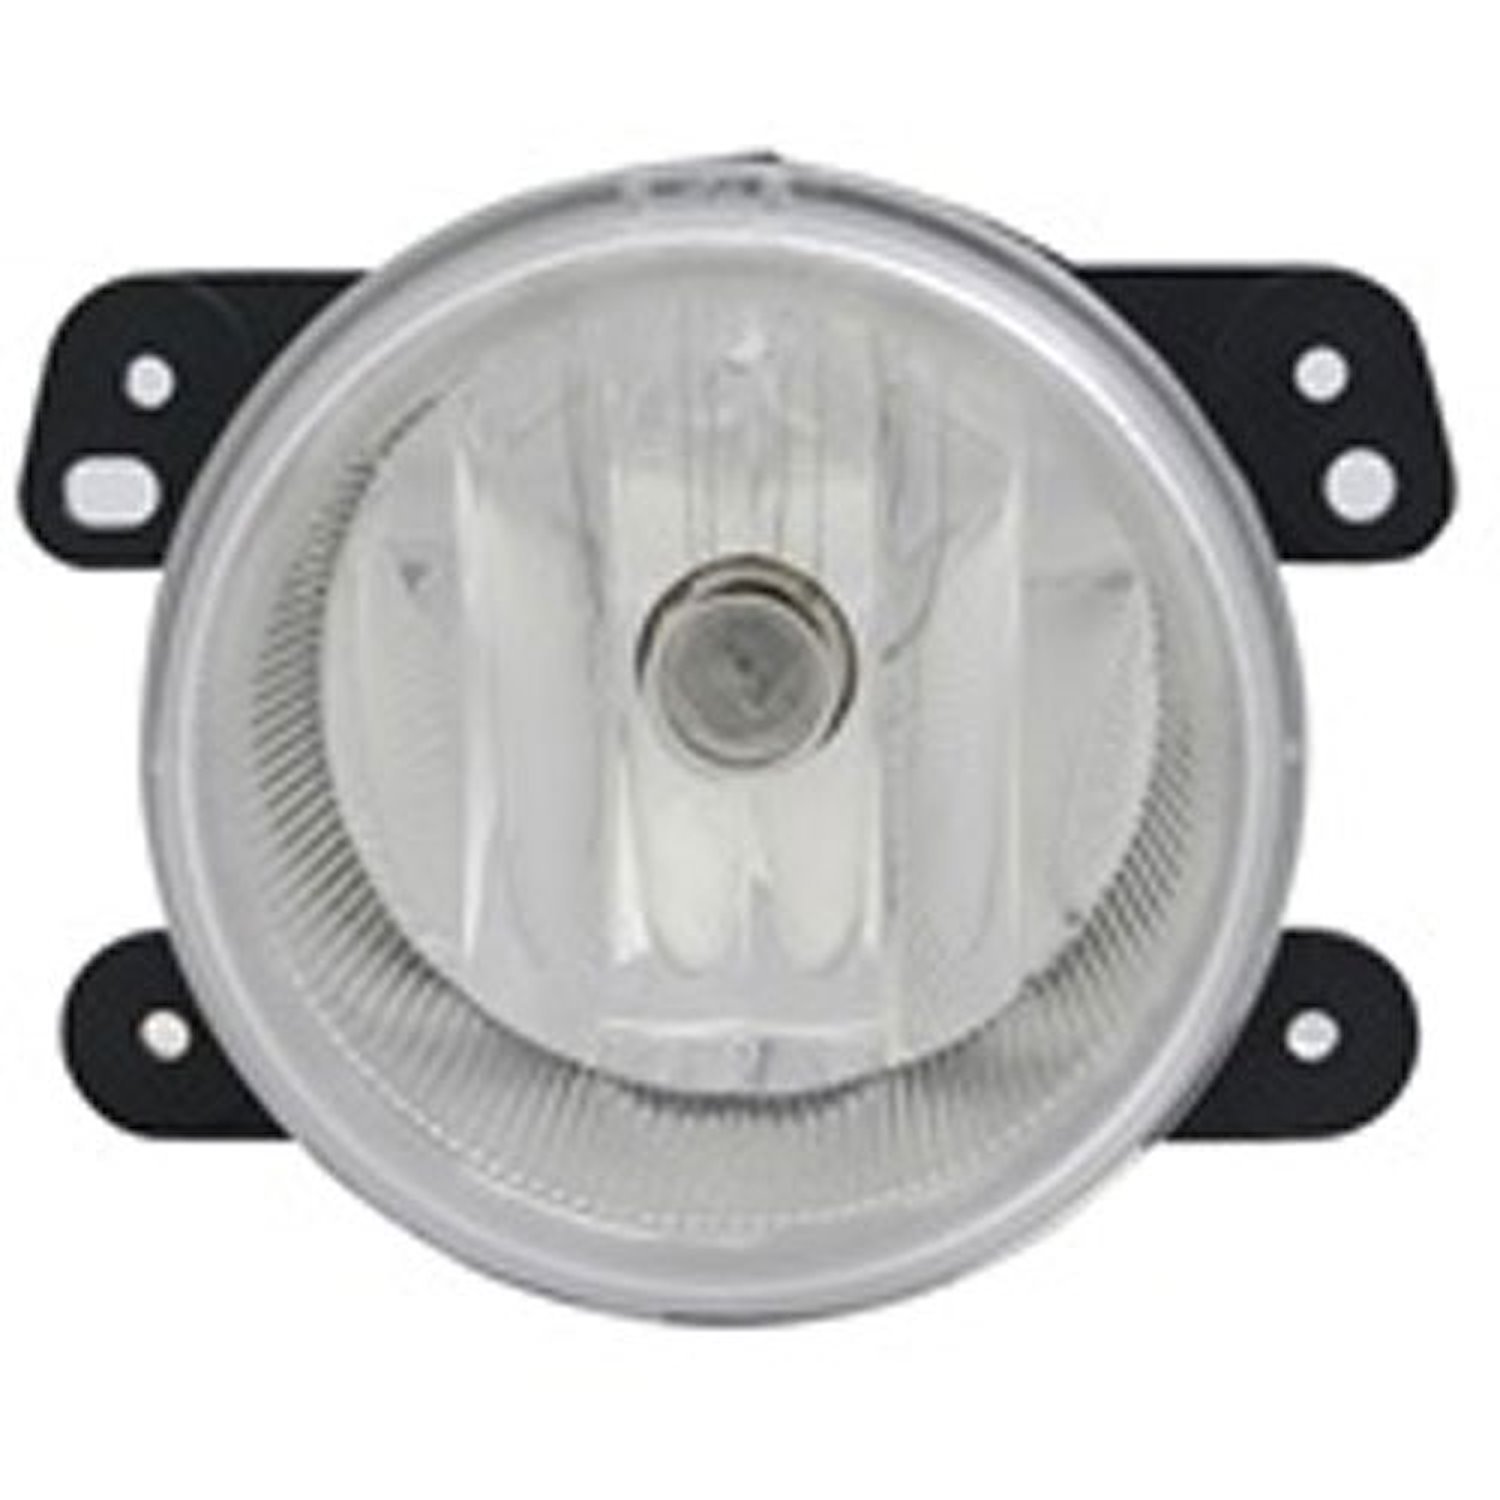 Replacement fog light assembly fits the left or right side on 11-13 Jeep Grand Cherokee WK and 10-16